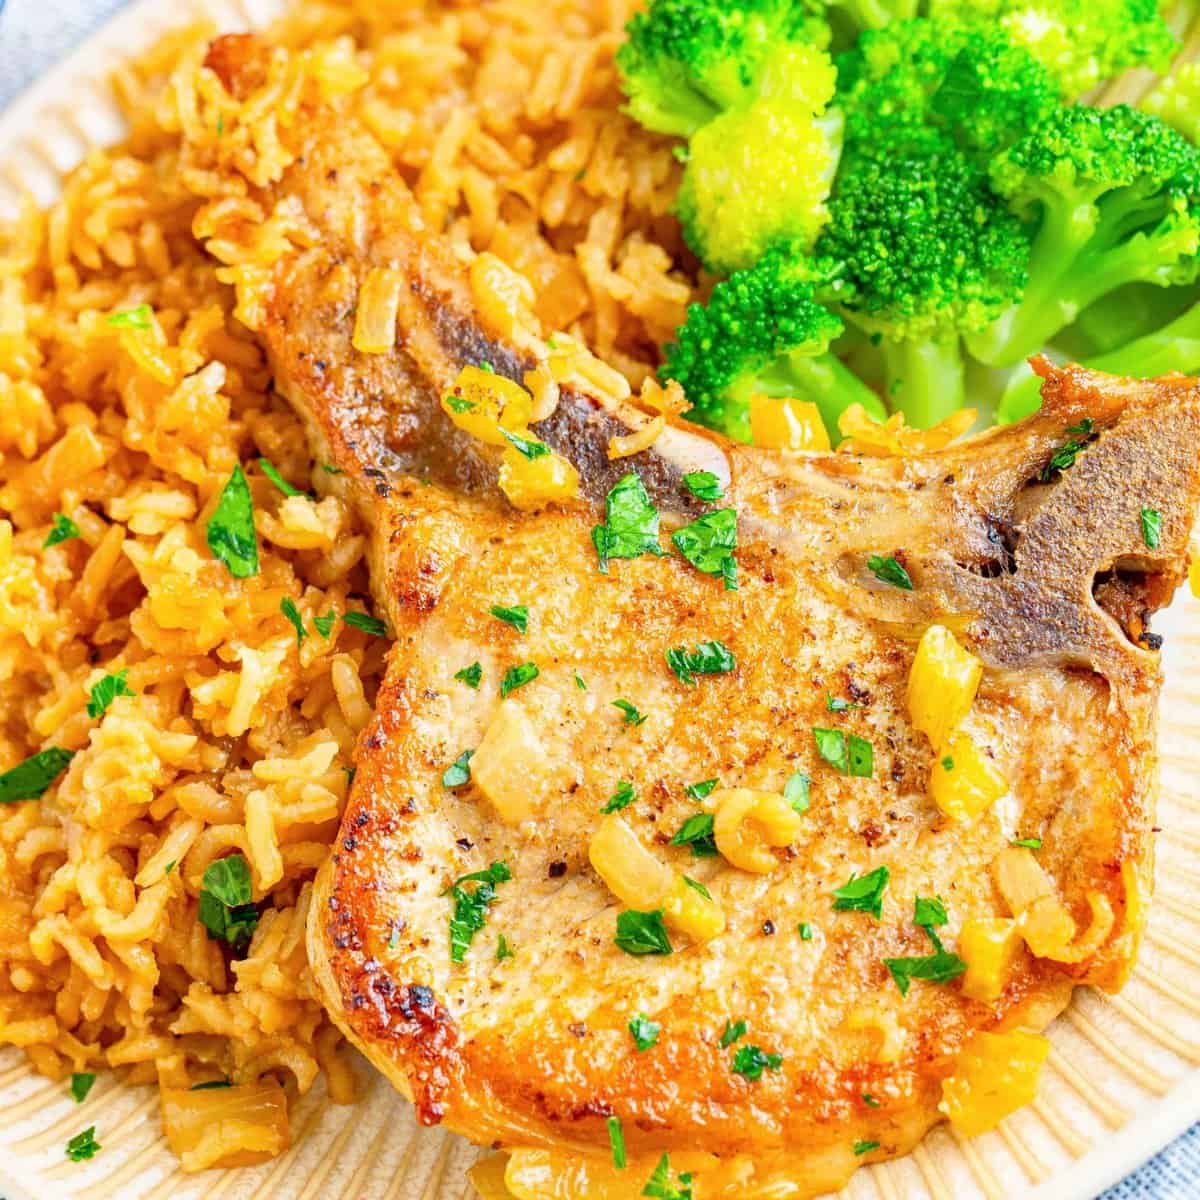 Baked Pork Chops and Rice